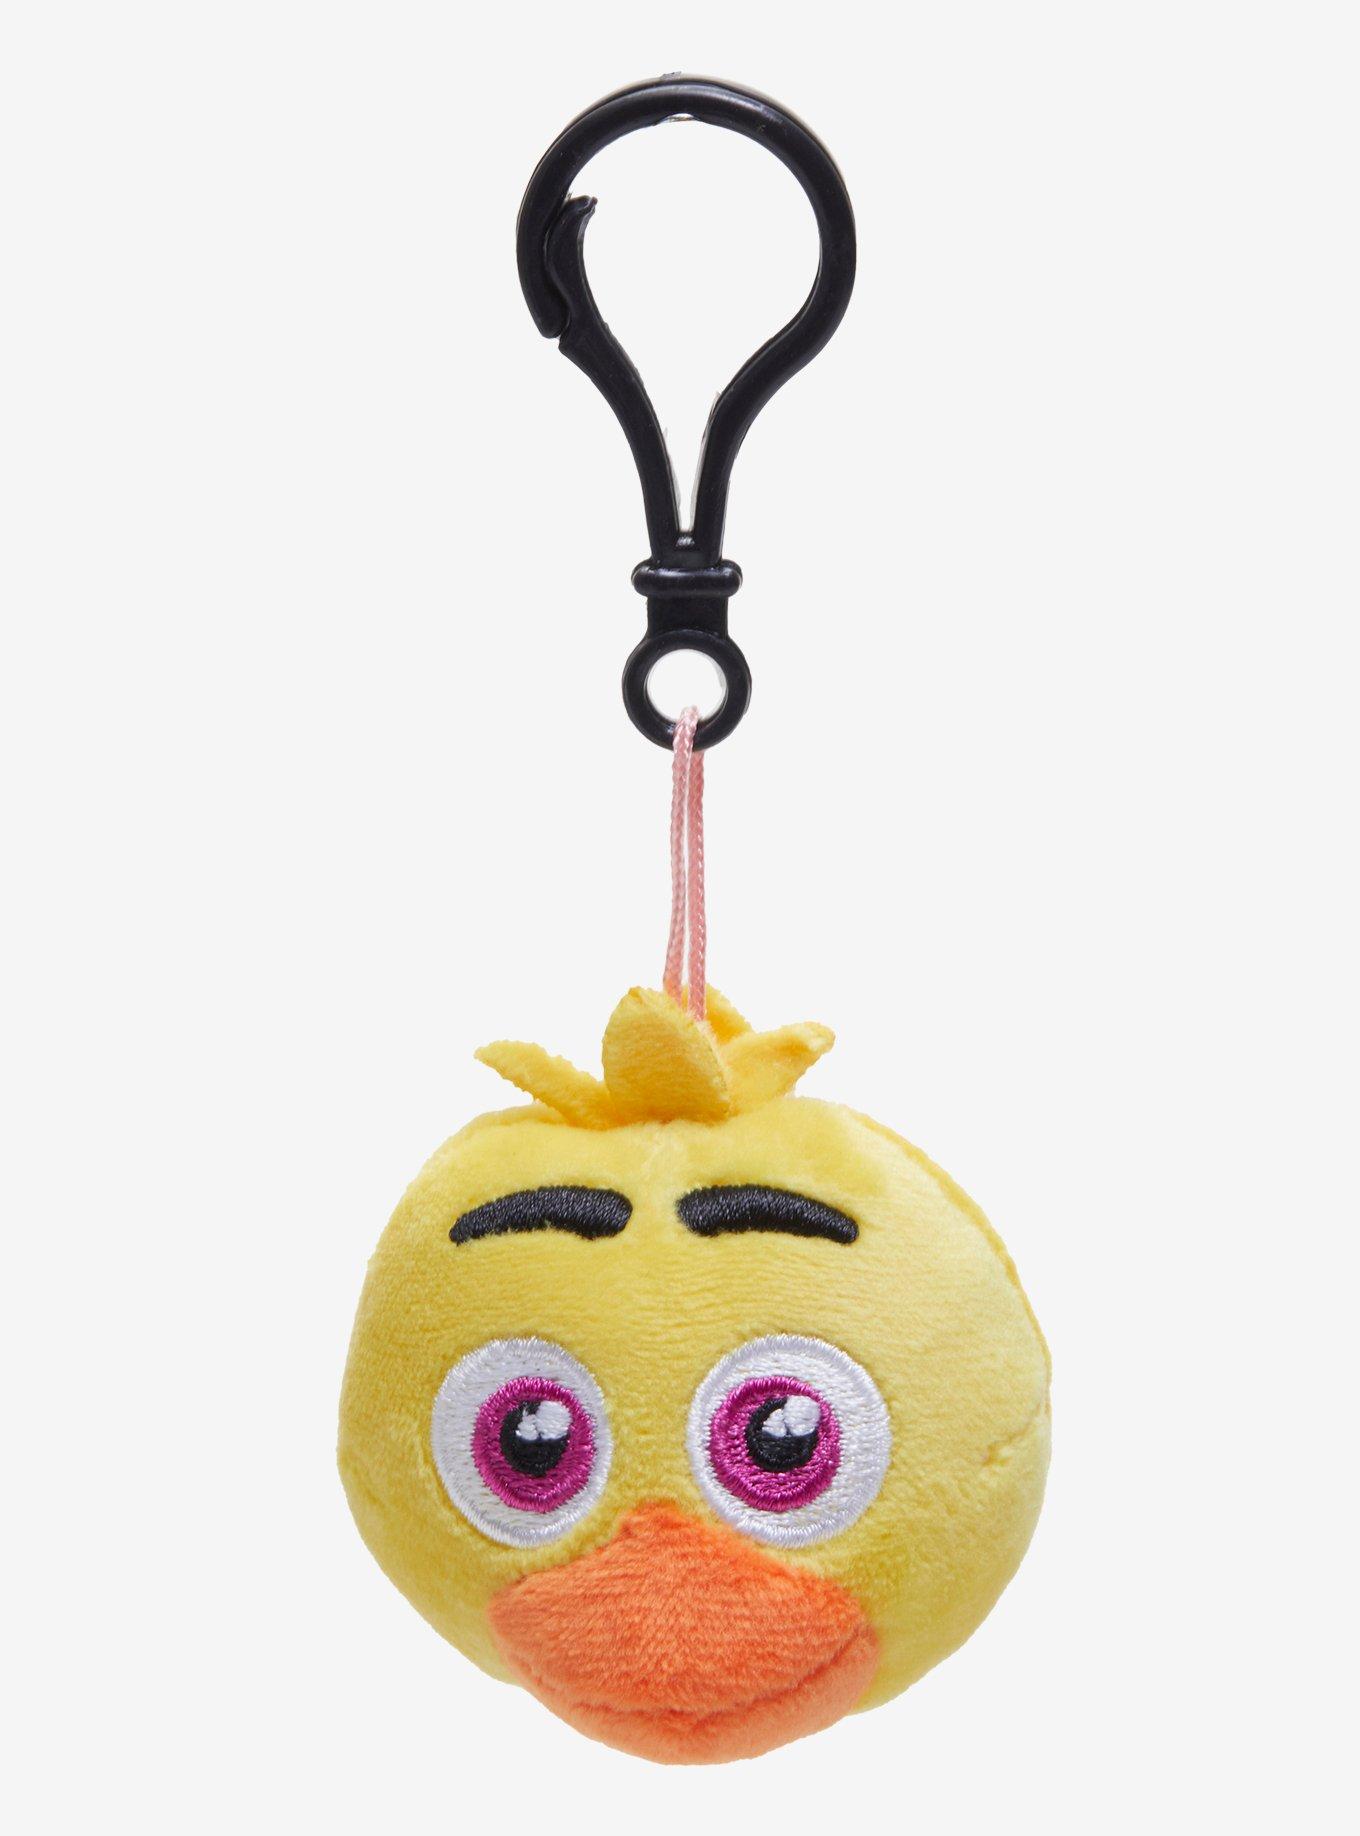 Five Nights At Freddy's Chica Plush Key Chain